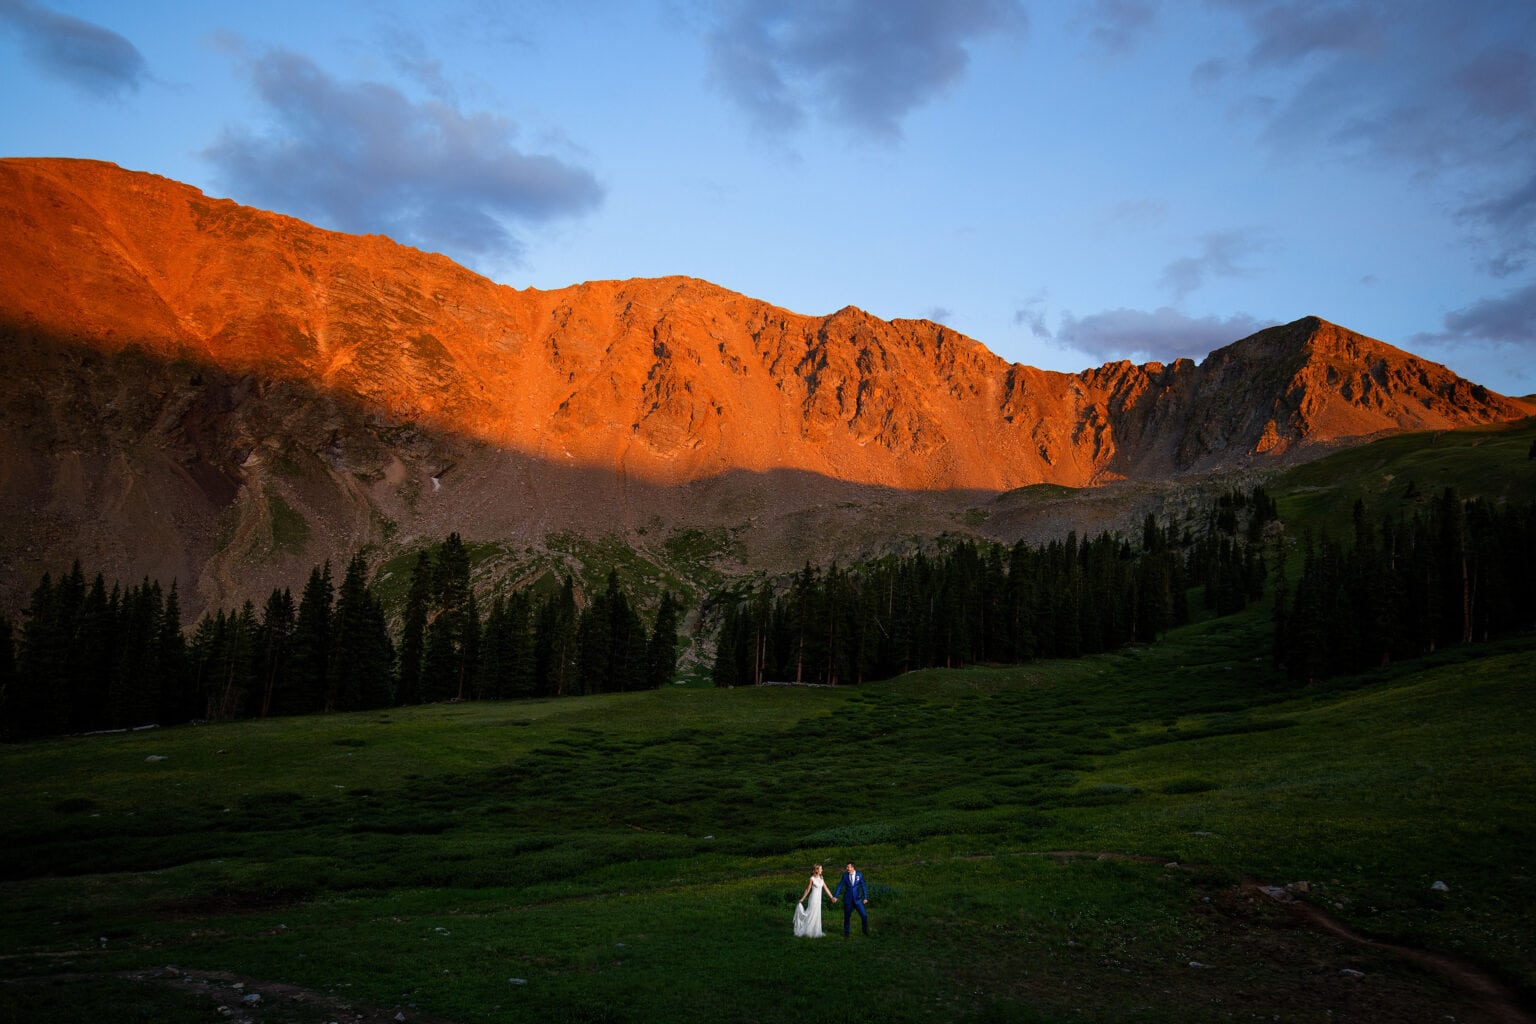 Keely and Steven pose as alpenglow illuminates the East Wall at Arapahoe Basin during their wedding day